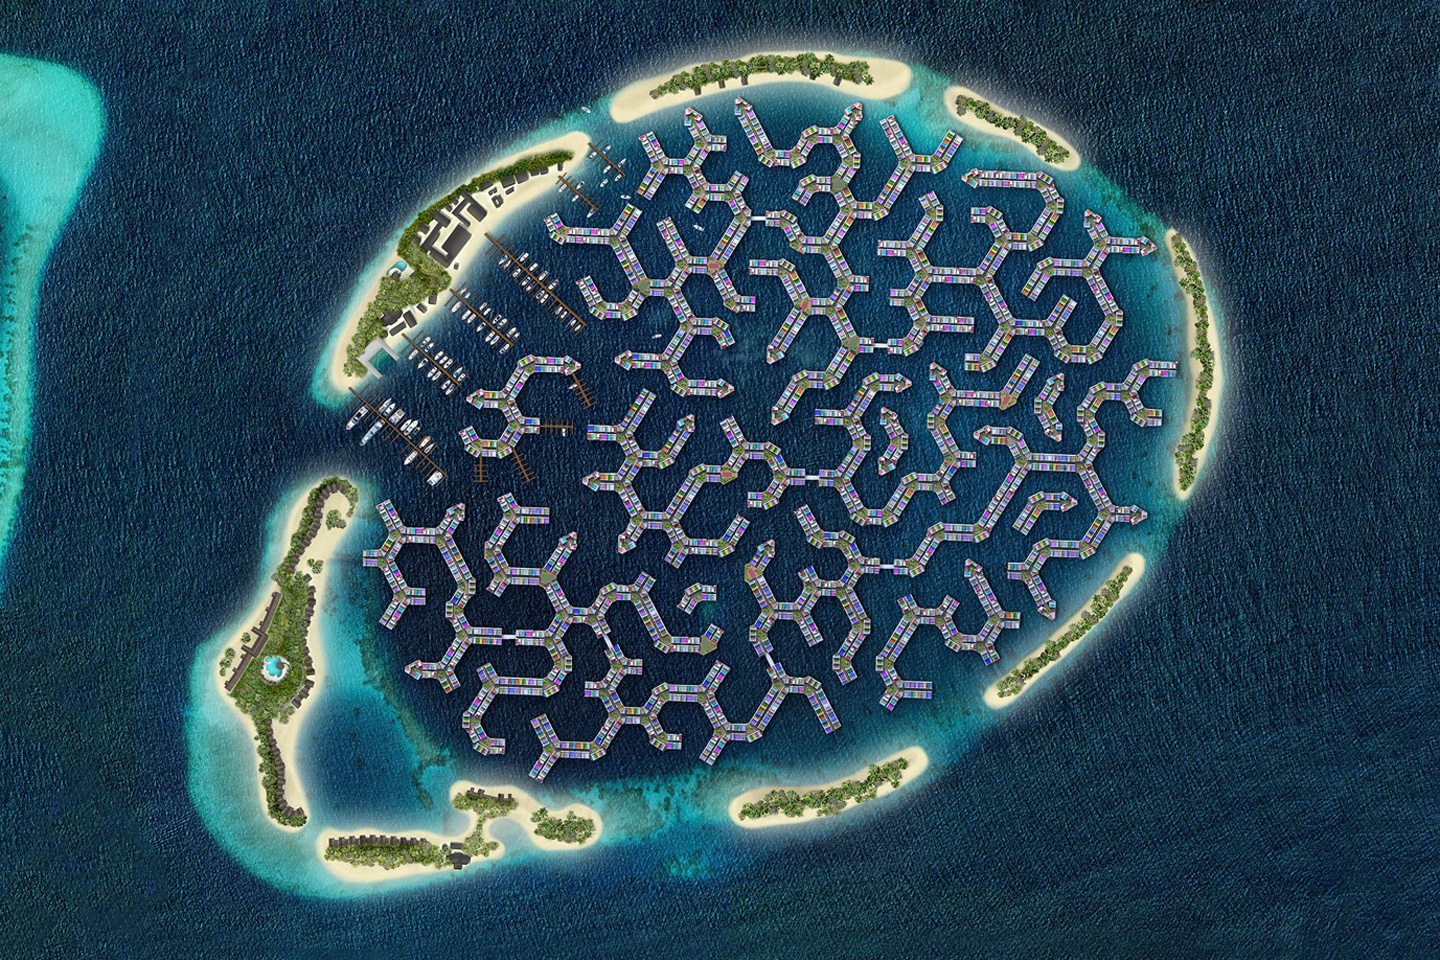 #Maldives is building a coral-shaped floating city to overcome rising sea levels